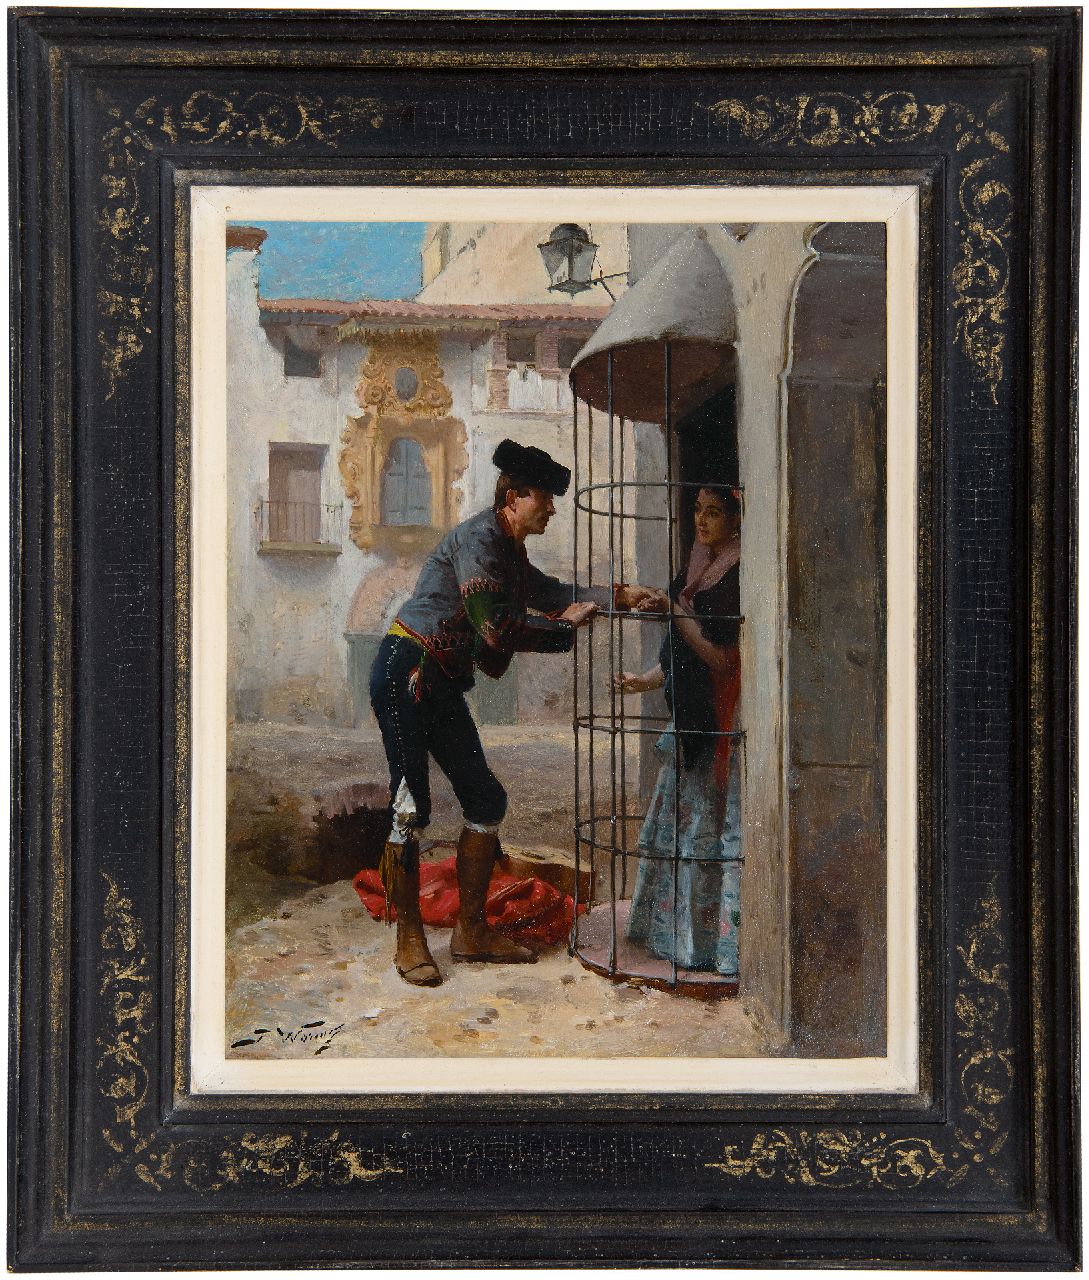 Worms J.  | Jules Worms | Paintings offered for sale | The amorous torero, oil on panel 27.0 x 21.8 cm, signed l.l.